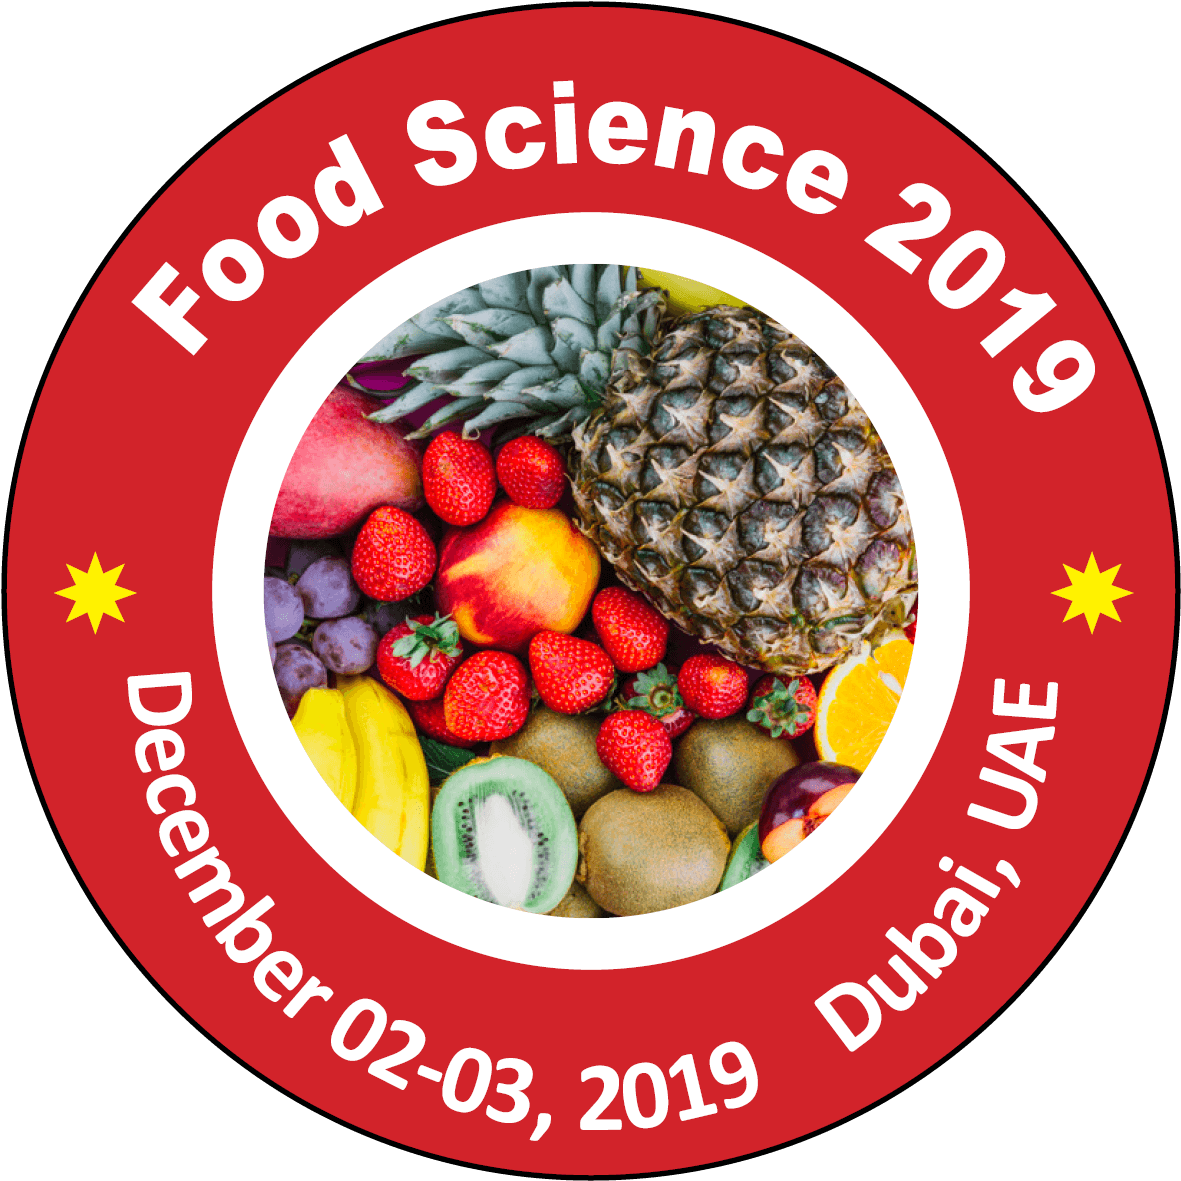 Food Science Conference2019 Dubai PNG image